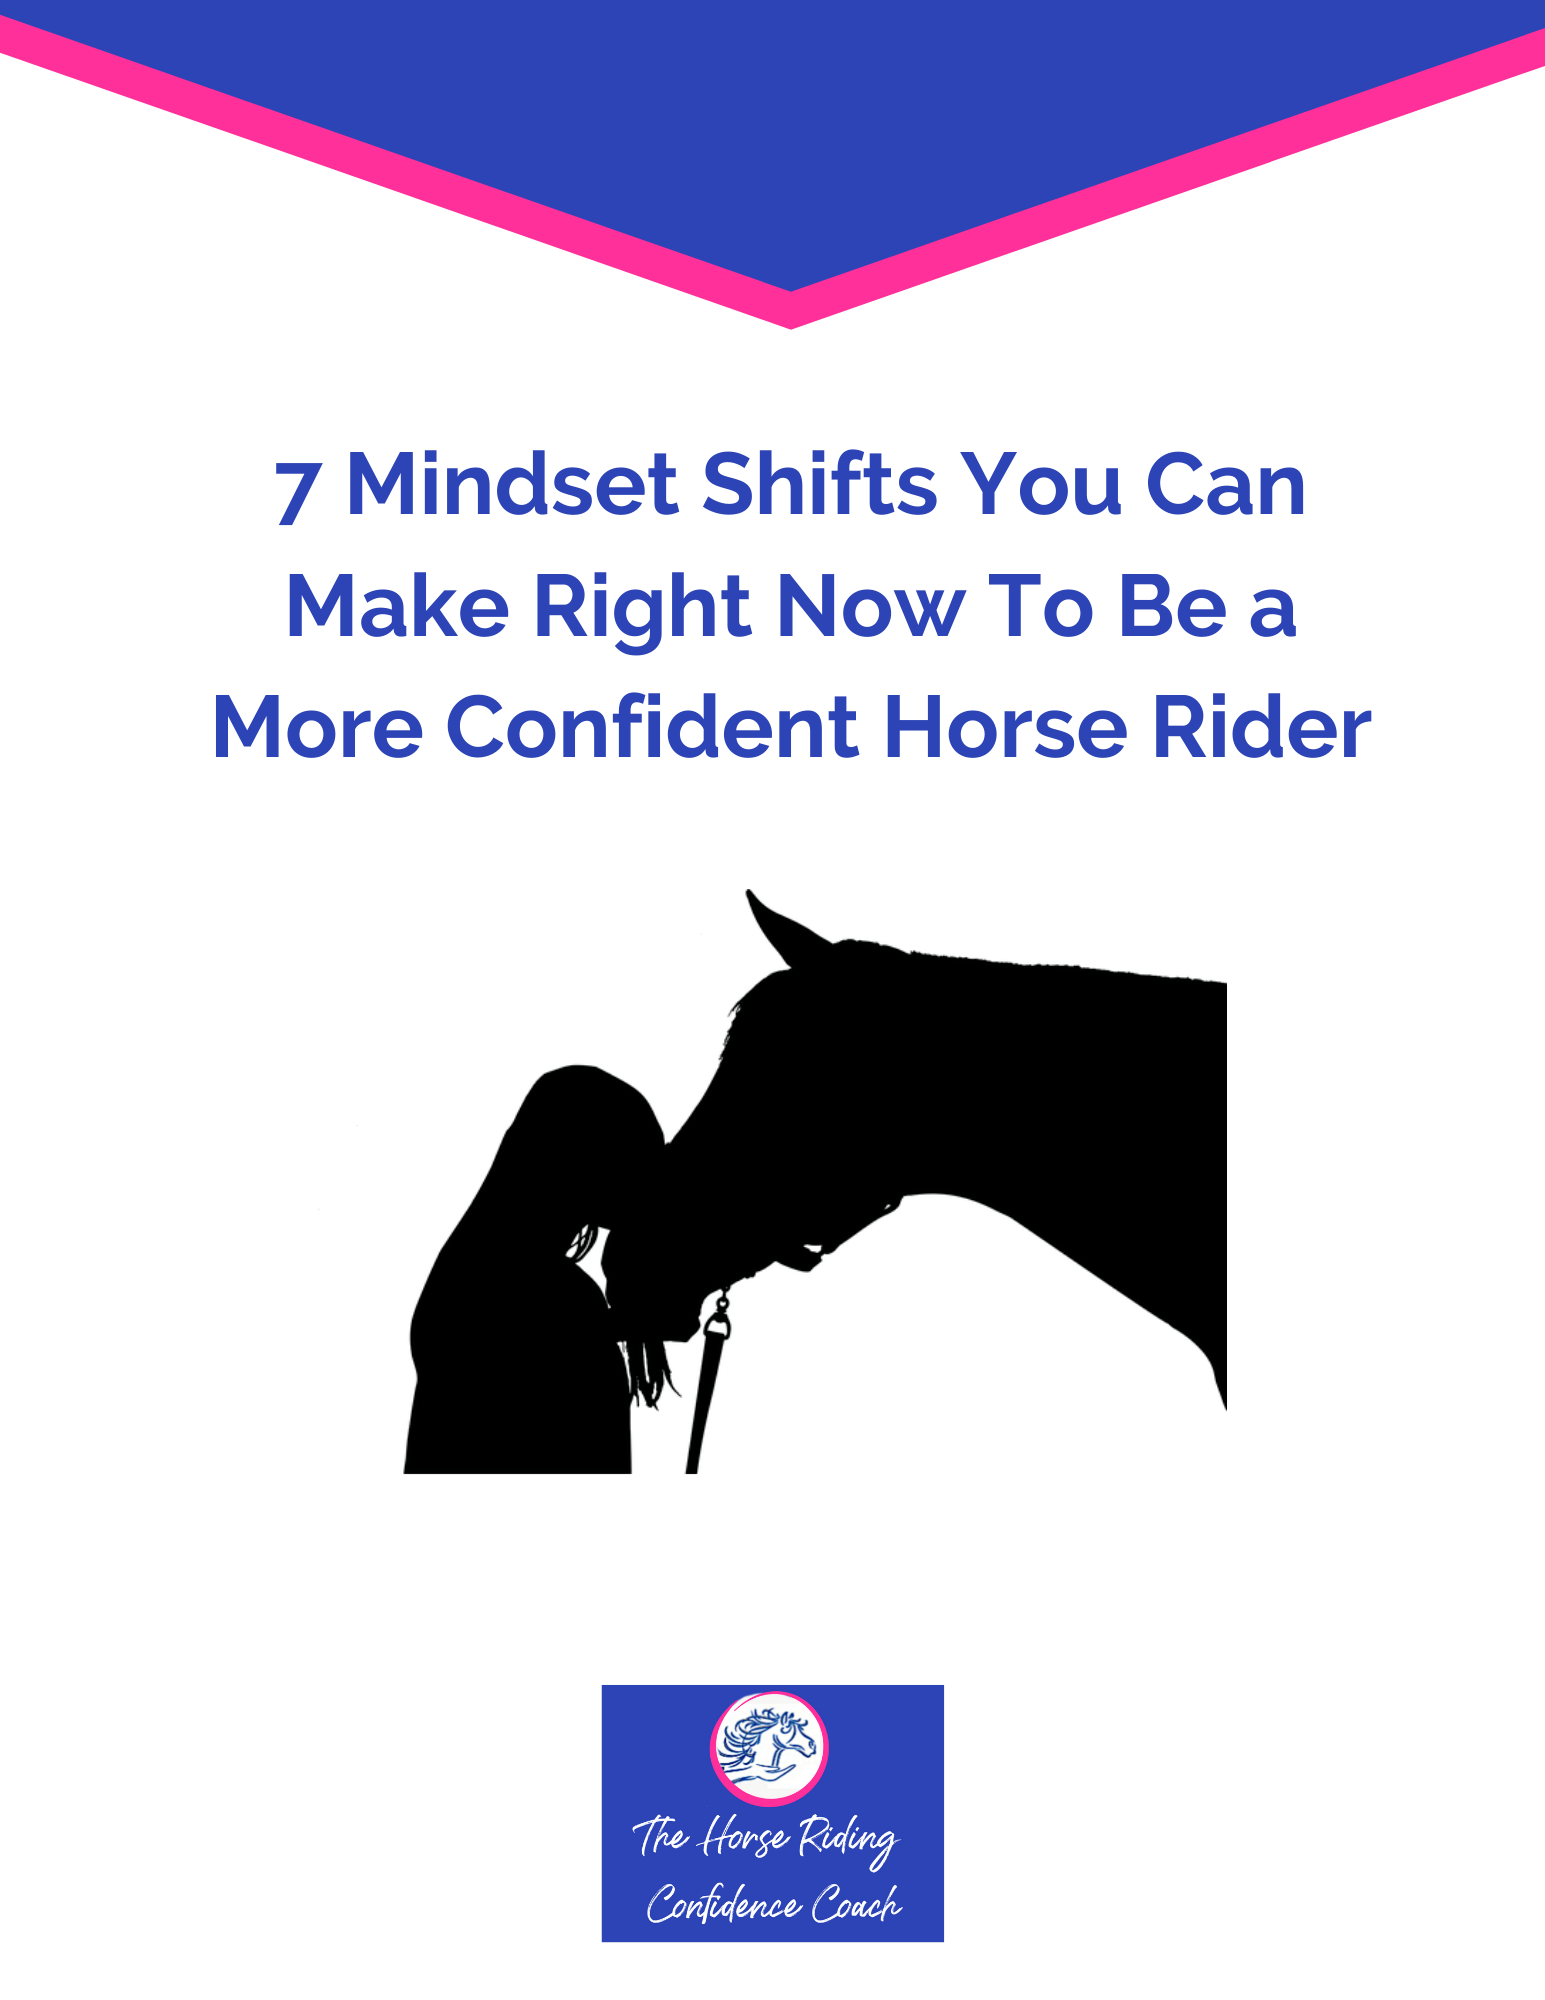 7 Mindset Shifts You Can Make Now To Be A More Confident Horse Rider